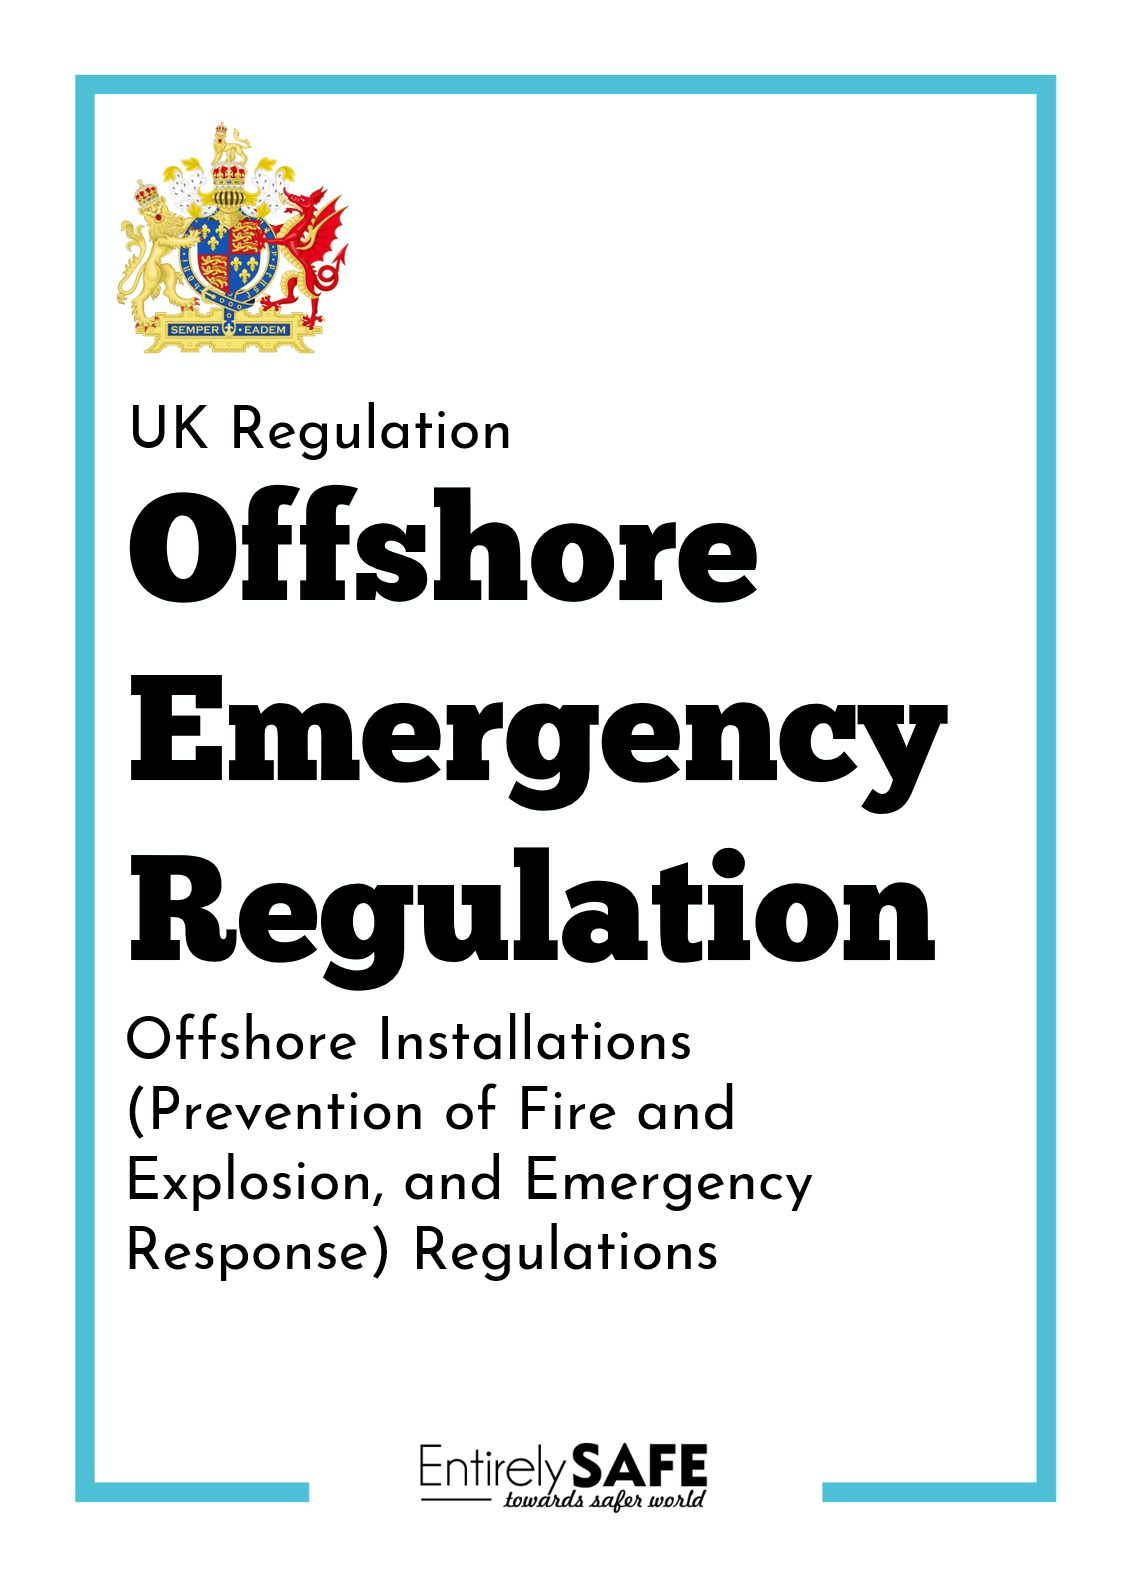 163-Offshore Installations (Prevention of Fire and Explosion, and Emergency Response) Regulations